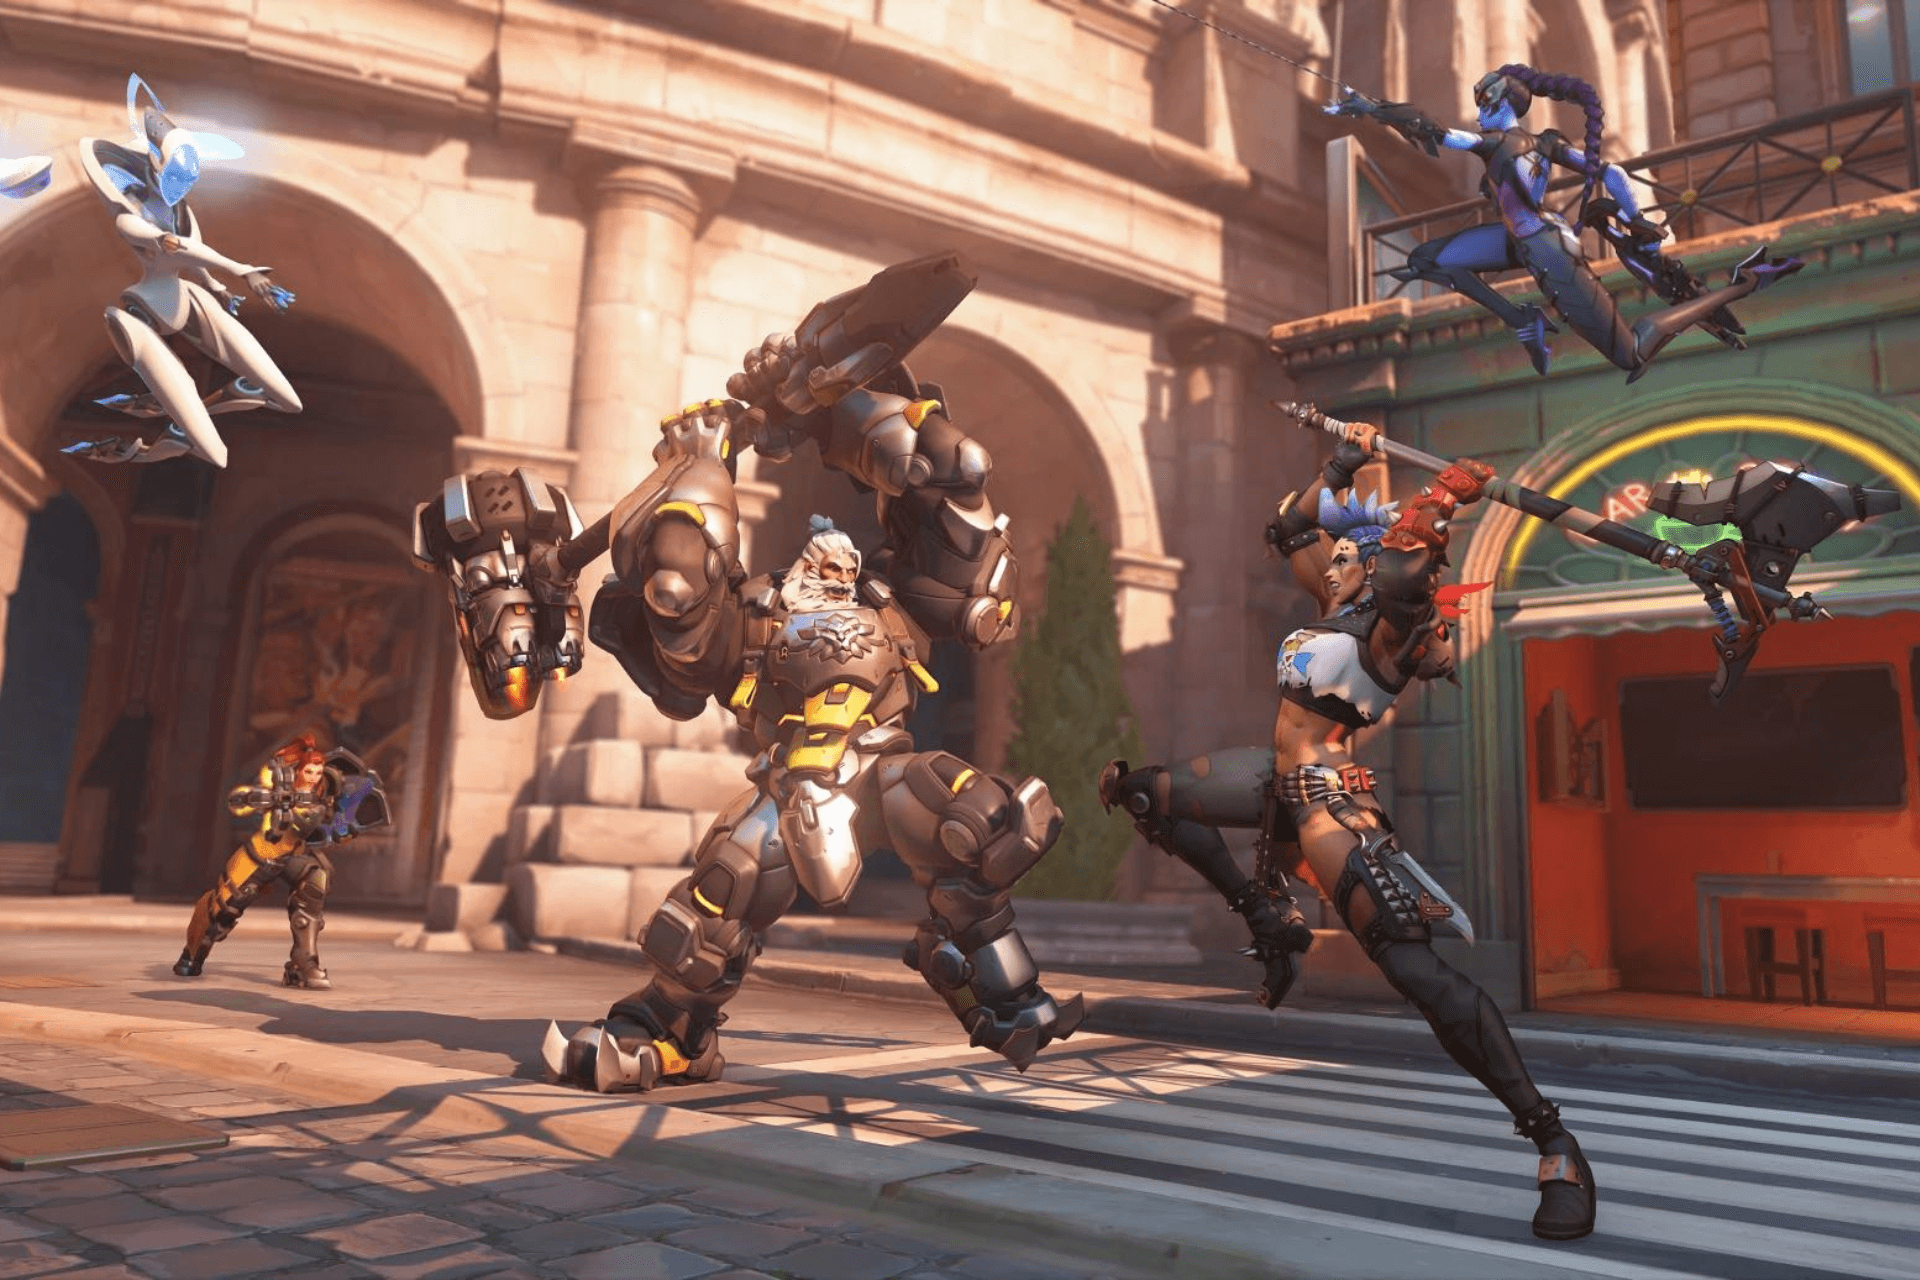 Overwatch developer update: No BattlePass needed and new Mythic skins introduced